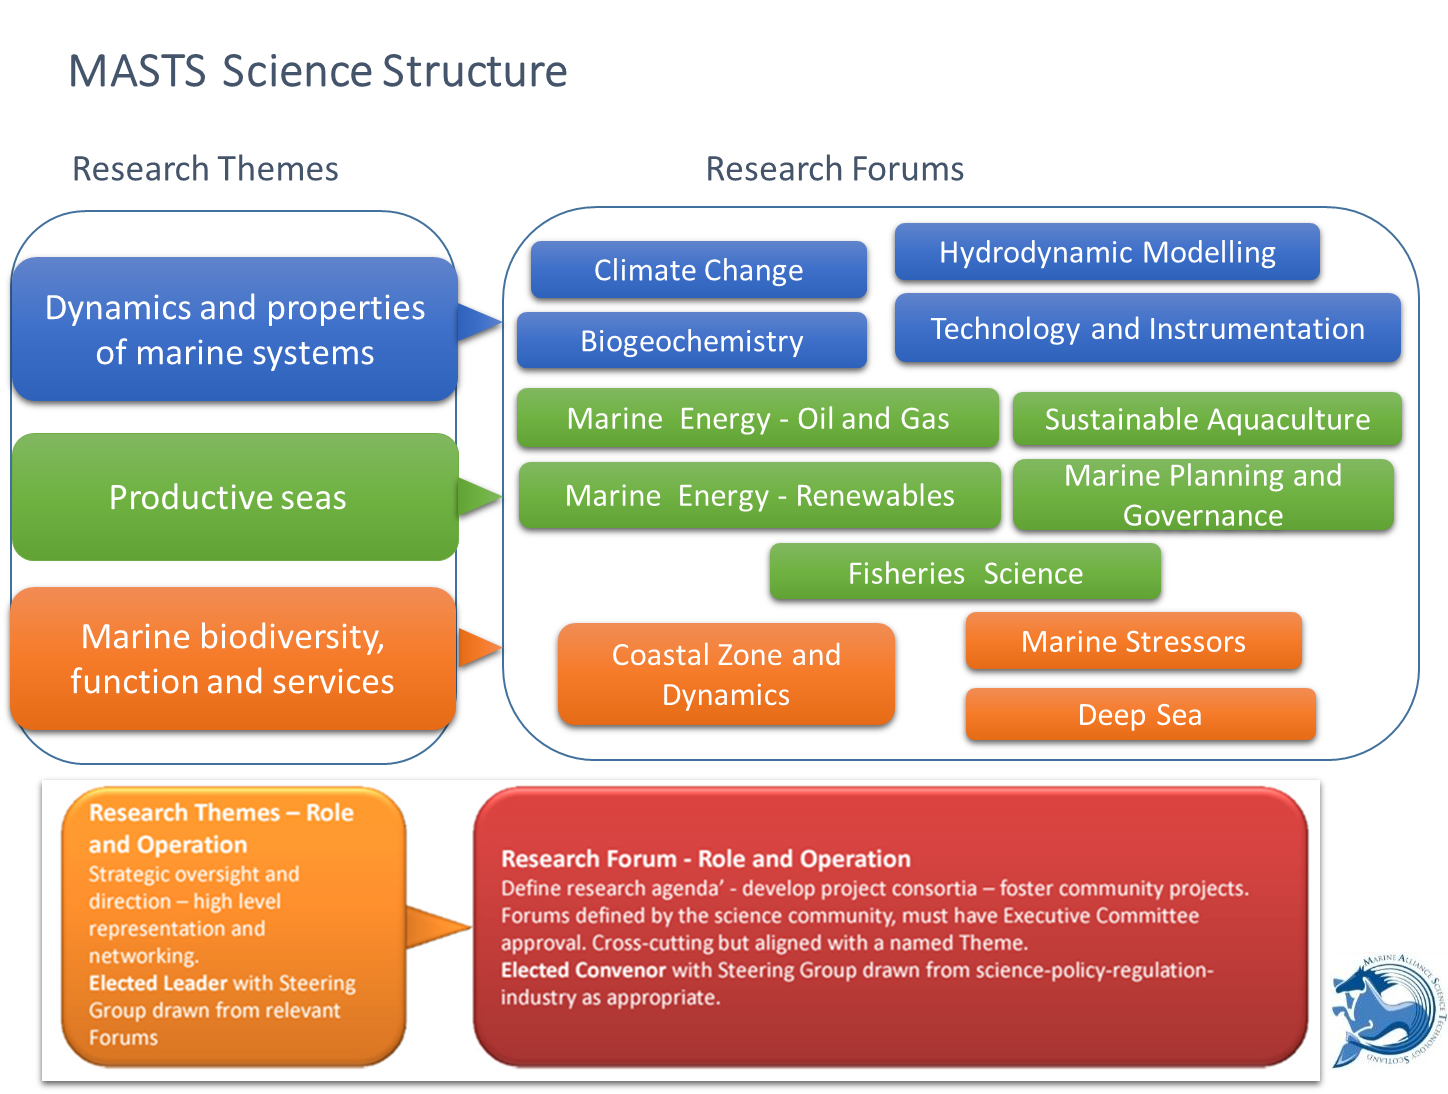 MASTS science structure